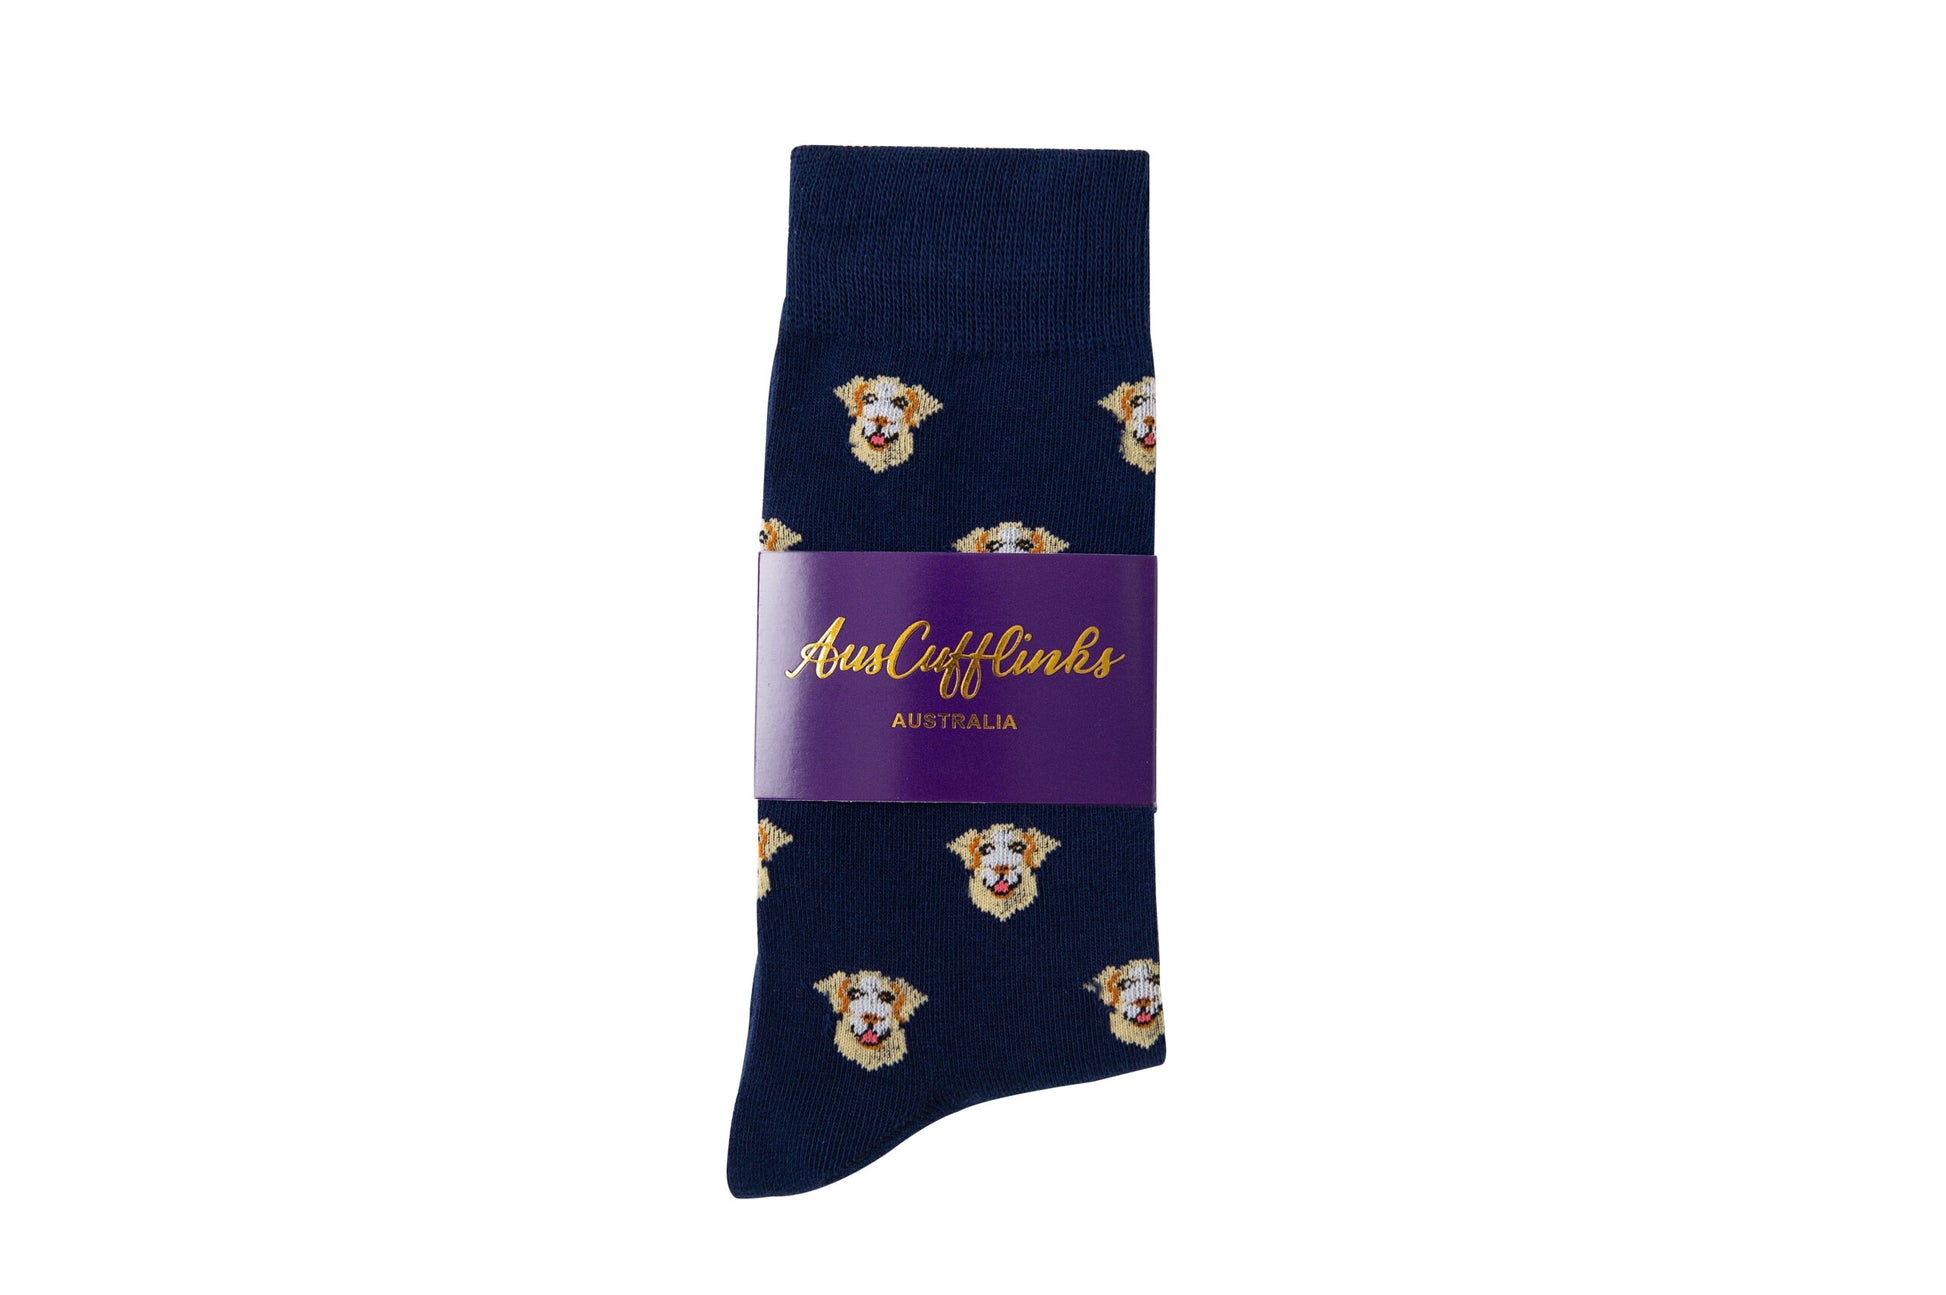 A navy sock with a Labrador Dog on it.